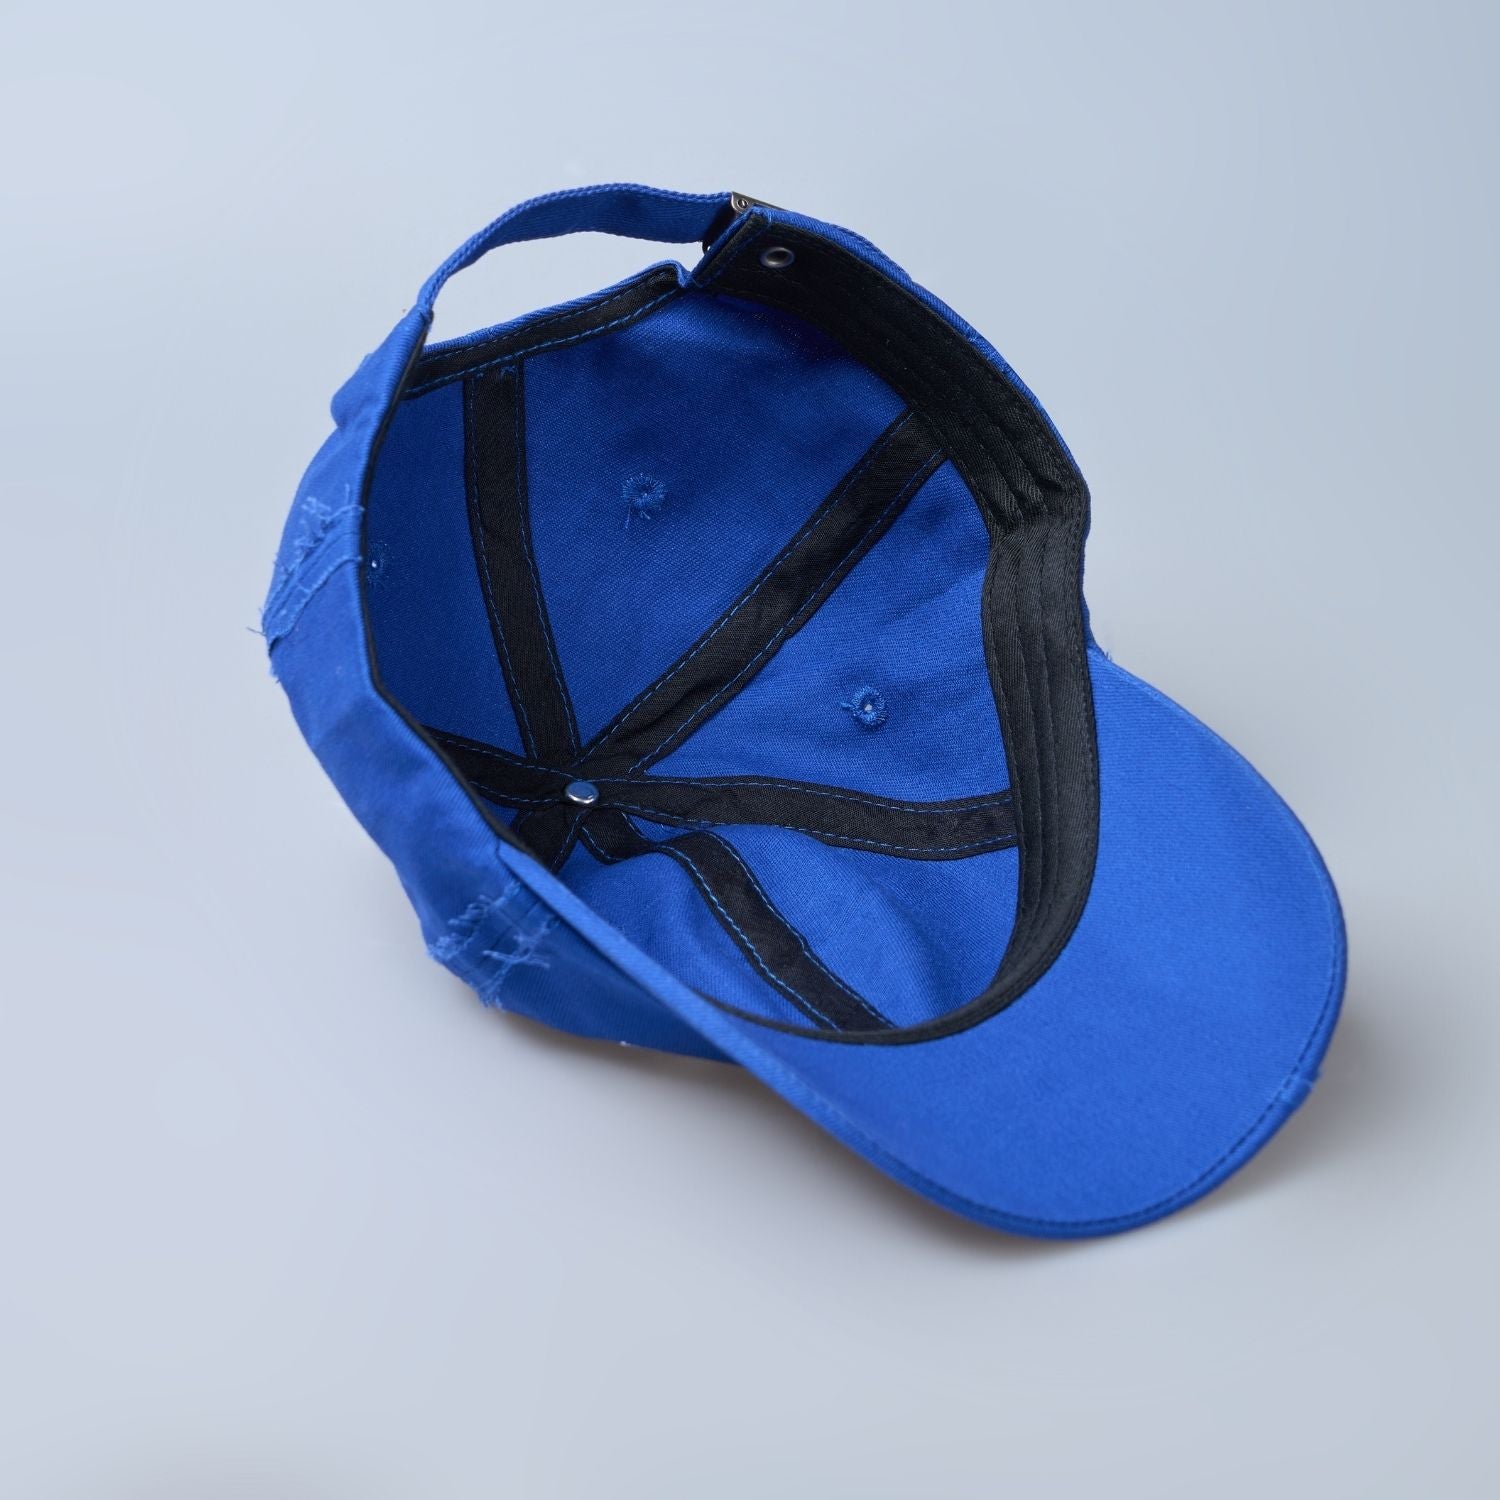 Blue colored, wide brim cap for men with adjustable strap, inside view.